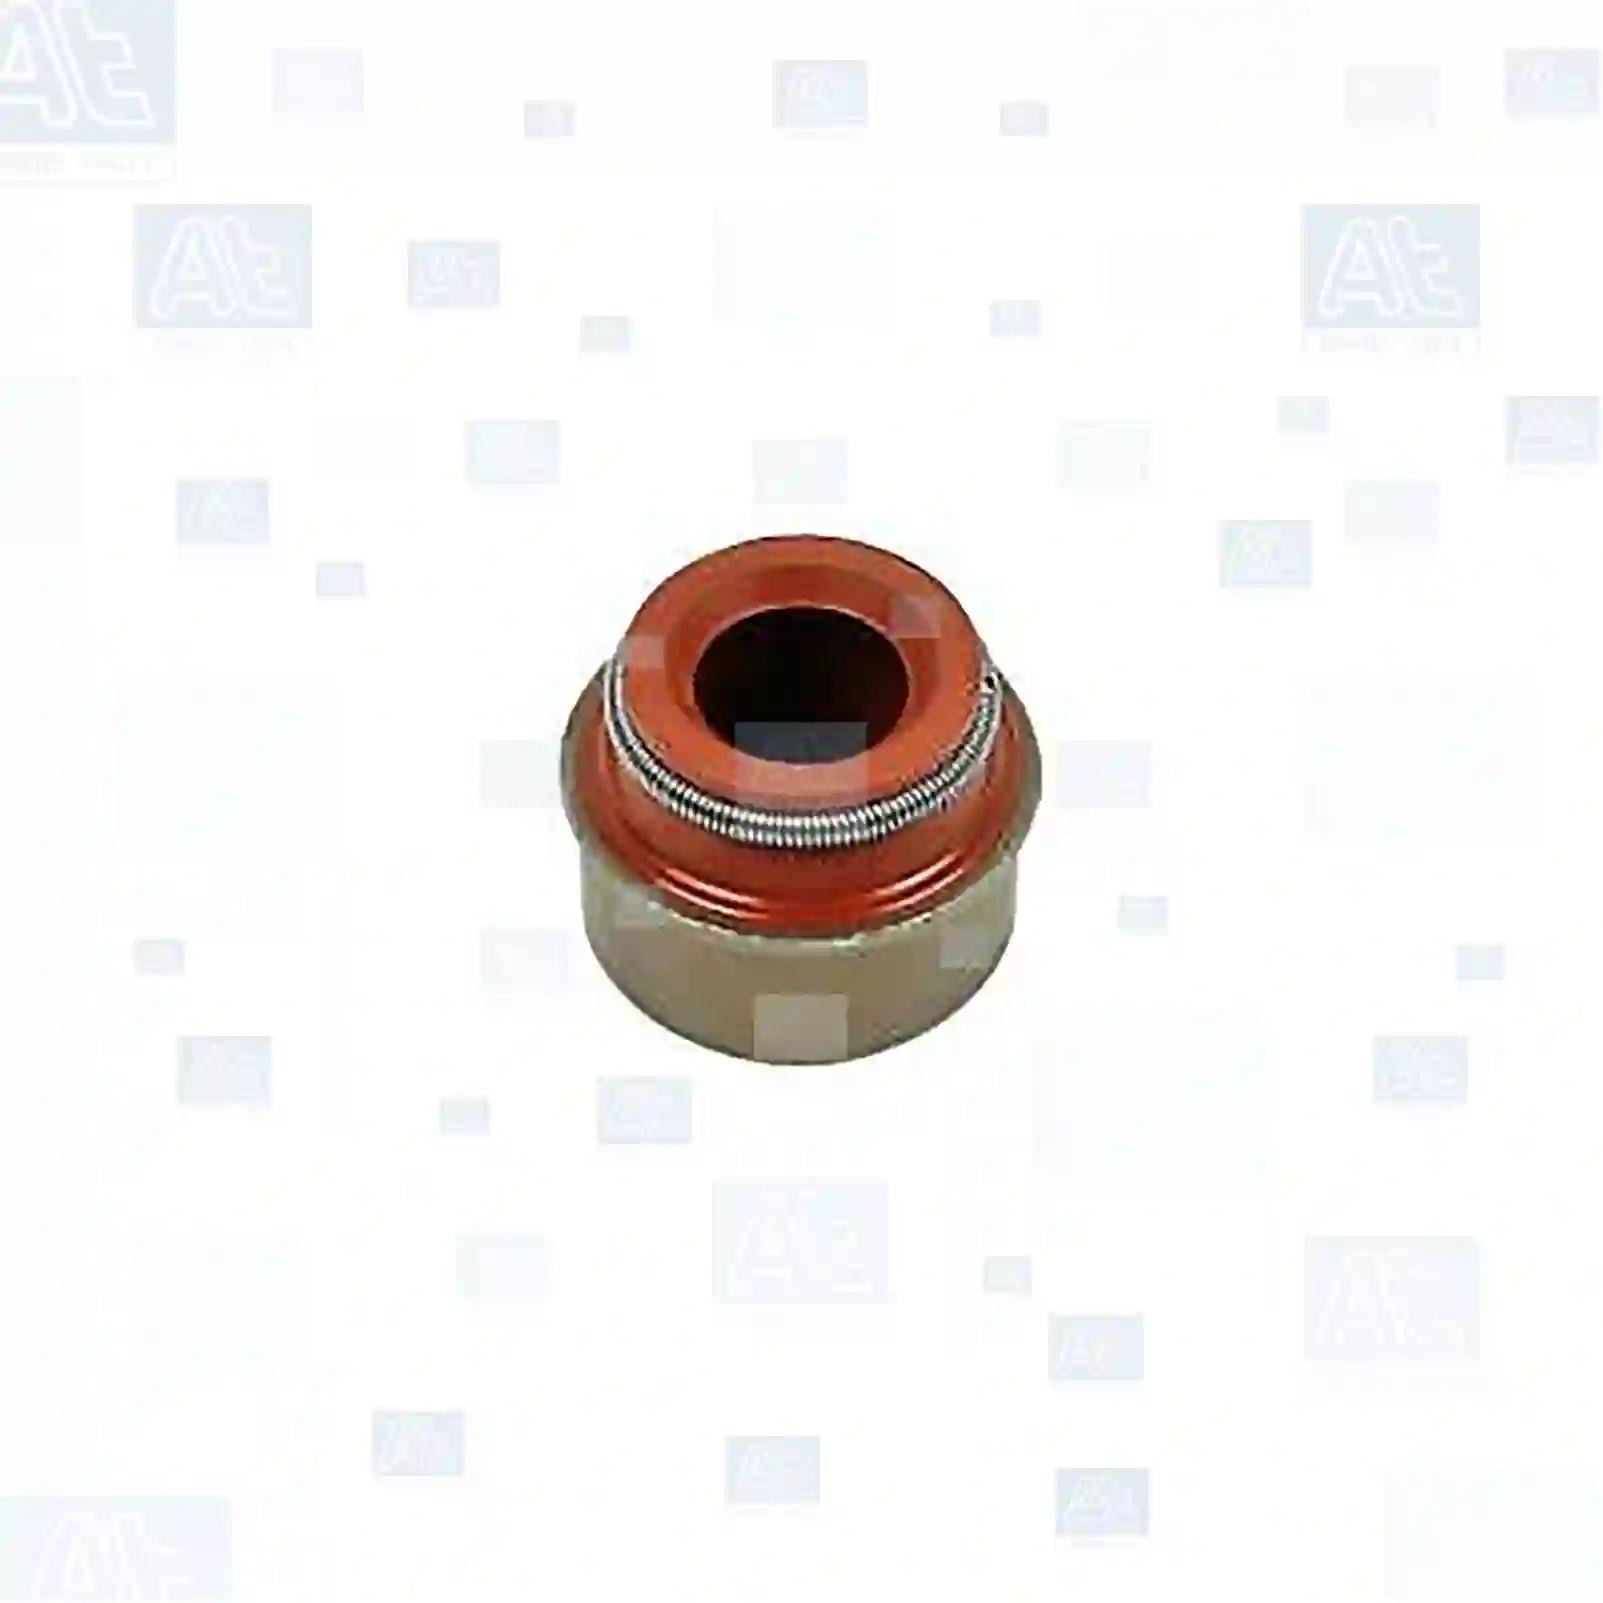 Valve stem seal, 77700697, 04357028, 07500716, 07553616, 07581344, 027109675, 027109675C, 031103351A, 11341305054, 095619, 095624, 095628, 098628, 9602012480, 7700103872, 04265701, 04357028, 07553616, 07581344, 07582158, 07650355, 07706068, 07709714, 46436047, 46440885, 7553616, 7581344, 7706068, 7709714, 1049794, 1639191, V86HF6571BA, 93160891, 04357028, 07553616, 07581344, 0000534858, 13207-6F901, 4412186, 095619, 095624, 095628, 098628, 9602012480, 7700103872, 7700736465, 8200234651, 021012326A, 027109675, 027109675C, 027109675, 027109675C, 1317772, 30638622, 30638662, 30889394, 3517860, 3517893, 027109675, 031103351A ||  77700697 At Spare Part | Engine, Accelerator Pedal, Camshaft, Connecting Rod, Crankcase, Crankshaft, Cylinder Head, Engine Suspension Mountings, Exhaust Manifold, Exhaust Gas Recirculation, Filter Kits, Flywheel Housing, General Overhaul Kits, Engine, Intake Manifold, Oil Cleaner, Oil Cooler, Oil Filter, Oil Pump, Oil Sump, Piston & Liner, Sensor & Switch, Timing Case, Turbocharger, Cooling System, Belt Tensioner, Coolant Filter, Coolant Pipe, Corrosion Prevention Agent, Drive, Expansion Tank, Fan, Intercooler, Monitors & Gauges, Radiator, Thermostat, V-Belt / Timing belt, Water Pump, Fuel System, Electronical Injector Unit, Feed Pump, Fuel Filter, cpl., Fuel Gauge Sender,  Fuel Line, Fuel Pump, Fuel Tank, Injection Line Kit, Injection Pump, Exhaust System, Clutch & Pedal, Gearbox, Propeller Shaft, Axles, Brake System, Hubs & Wheels, Suspension, Leaf Spring, Universal Parts / Accessories, Steering, Electrical System, Cabin Valve stem seal, 77700697, 04357028, 07500716, 07553616, 07581344, 027109675, 027109675C, 031103351A, 11341305054, 095619, 095624, 095628, 098628, 9602012480, 7700103872, 04265701, 04357028, 07553616, 07581344, 07582158, 07650355, 07706068, 07709714, 46436047, 46440885, 7553616, 7581344, 7706068, 7709714, 1049794, 1639191, V86HF6571BA, 93160891, 04357028, 07553616, 07581344, 0000534858, 13207-6F901, 4412186, 095619, 095624, 095628, 098628, 9602012480, 7700103872, 7700736465, 8200234651, 021012326A, 027109675, 027109675C, 027109675, 027109675C, 1317772, 30638622, 30638662, 30889394, 3517860, 3517893, 027109675, 031103351A ||  77700697 At Spare Part | Engine, Accelerator Pedal, Camshaft, Connecting Rod, Crankcase, Crankshaft, Cylinder Head, Engine Suspension Mountings, Exhaust Manifold, Exhaust Gas Recirculation, Filter Kits, Flywheel Housing, General Overhaul Kits, Engine, Intake Manifold, Oil Cleaner, Oil Cooler, Oil Filter, Oil Pump, Oil Sump, Piston & Liner, Sensor & Switch, Timing Case, Turbocharger, Cooling System, Belt Tensioner, Coolant Filter, Coolant Pipe, Corrosion Prevention Agent, Drive, Expansion Tank, Fan, Intercooler, Monitors & Gauges, Radiator, Thermostat, V-Belt / Timing belt, Water Pump, Fuel System, Electronical Injector Unit, Feed Pump, Fuel Filter, cpl., Fuel Gauge Sender,  Fuel Line, Fuel Pump, Fuel Tank, Injection Line Kit, Injection Pump, Exhaust System, Clutch & Pedal, Gearbox, Propeller Shaft, Axles, Brake System, Hubs & Wheels, Suspension, Leaf Spring, Universal Parts / Accessories, Steering, Electrical System, Cabin